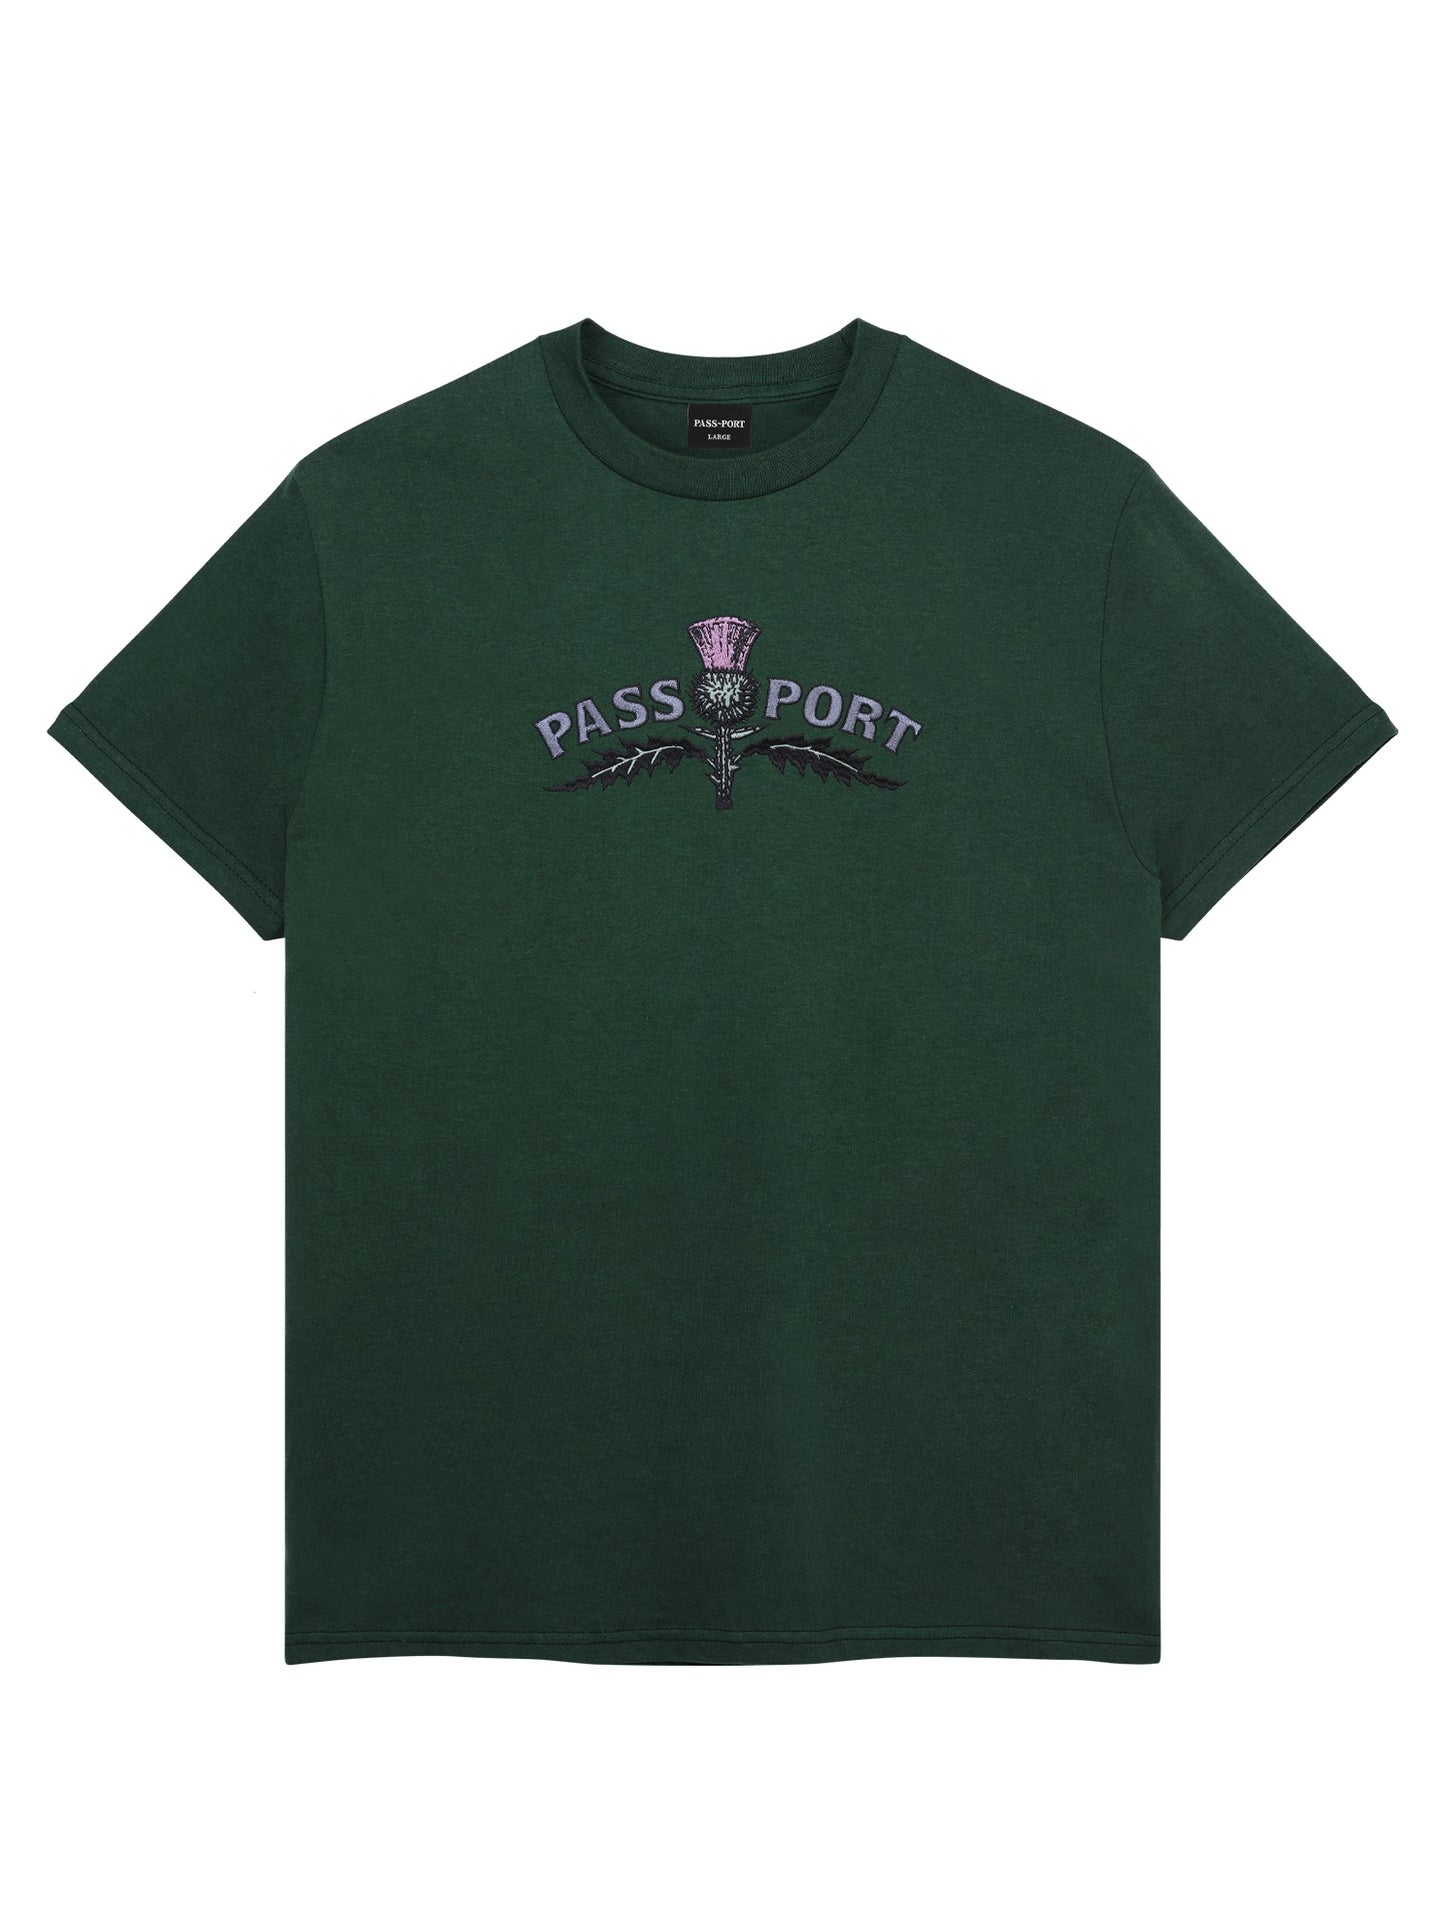 Passport Thistle Embroidery Tee - Forest Green